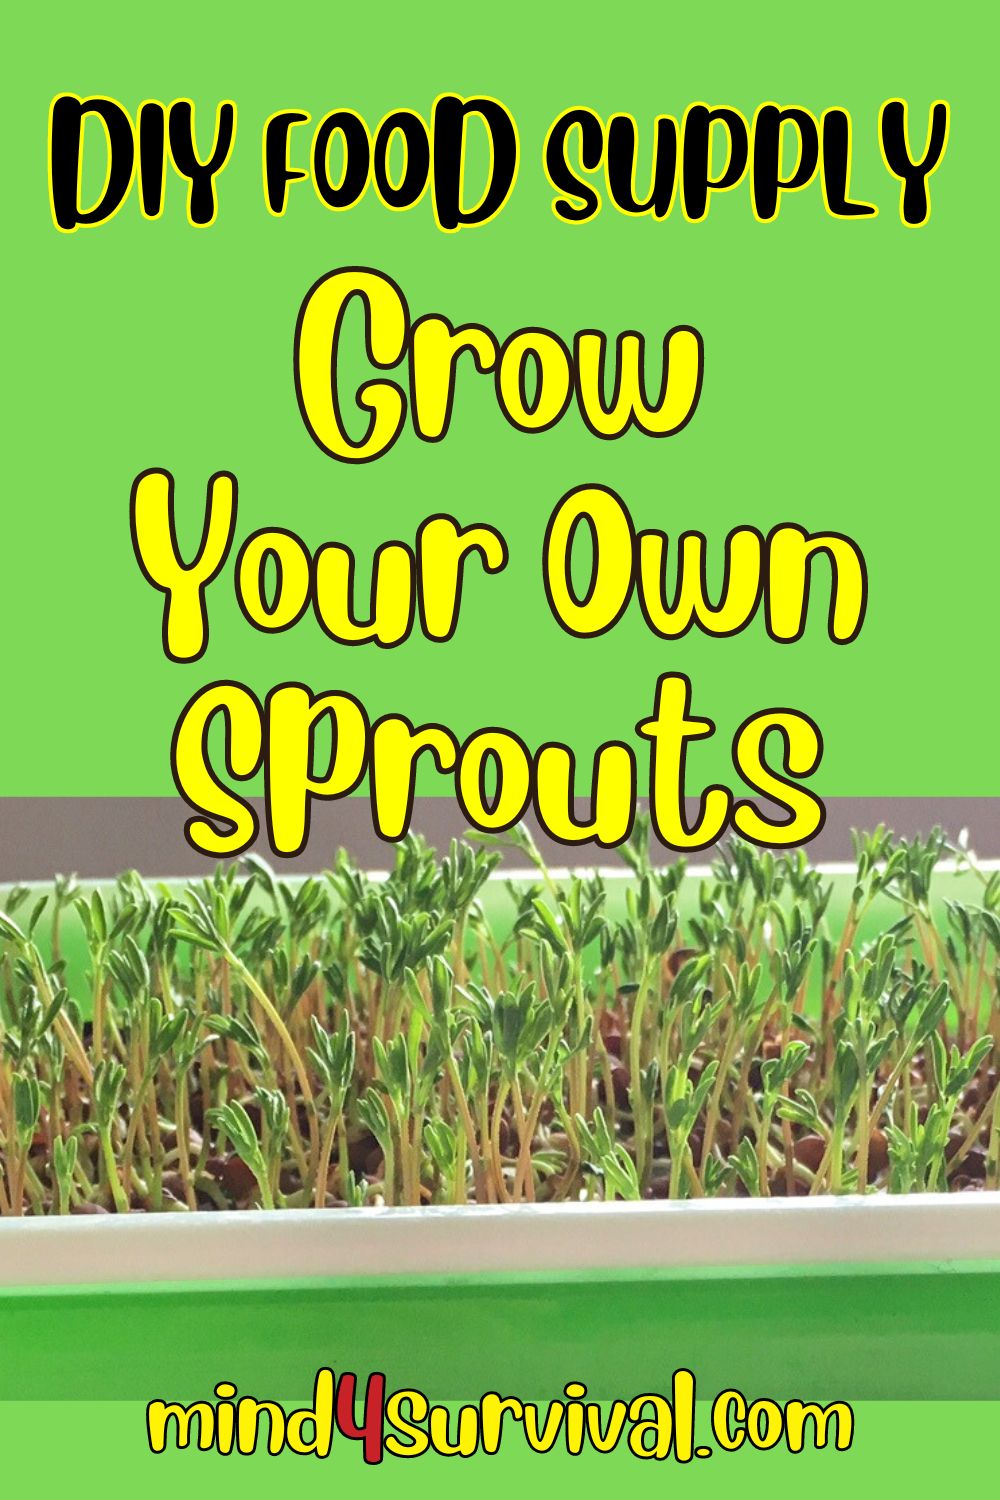 DIY Food Supply: Grow Your Own Sprouts